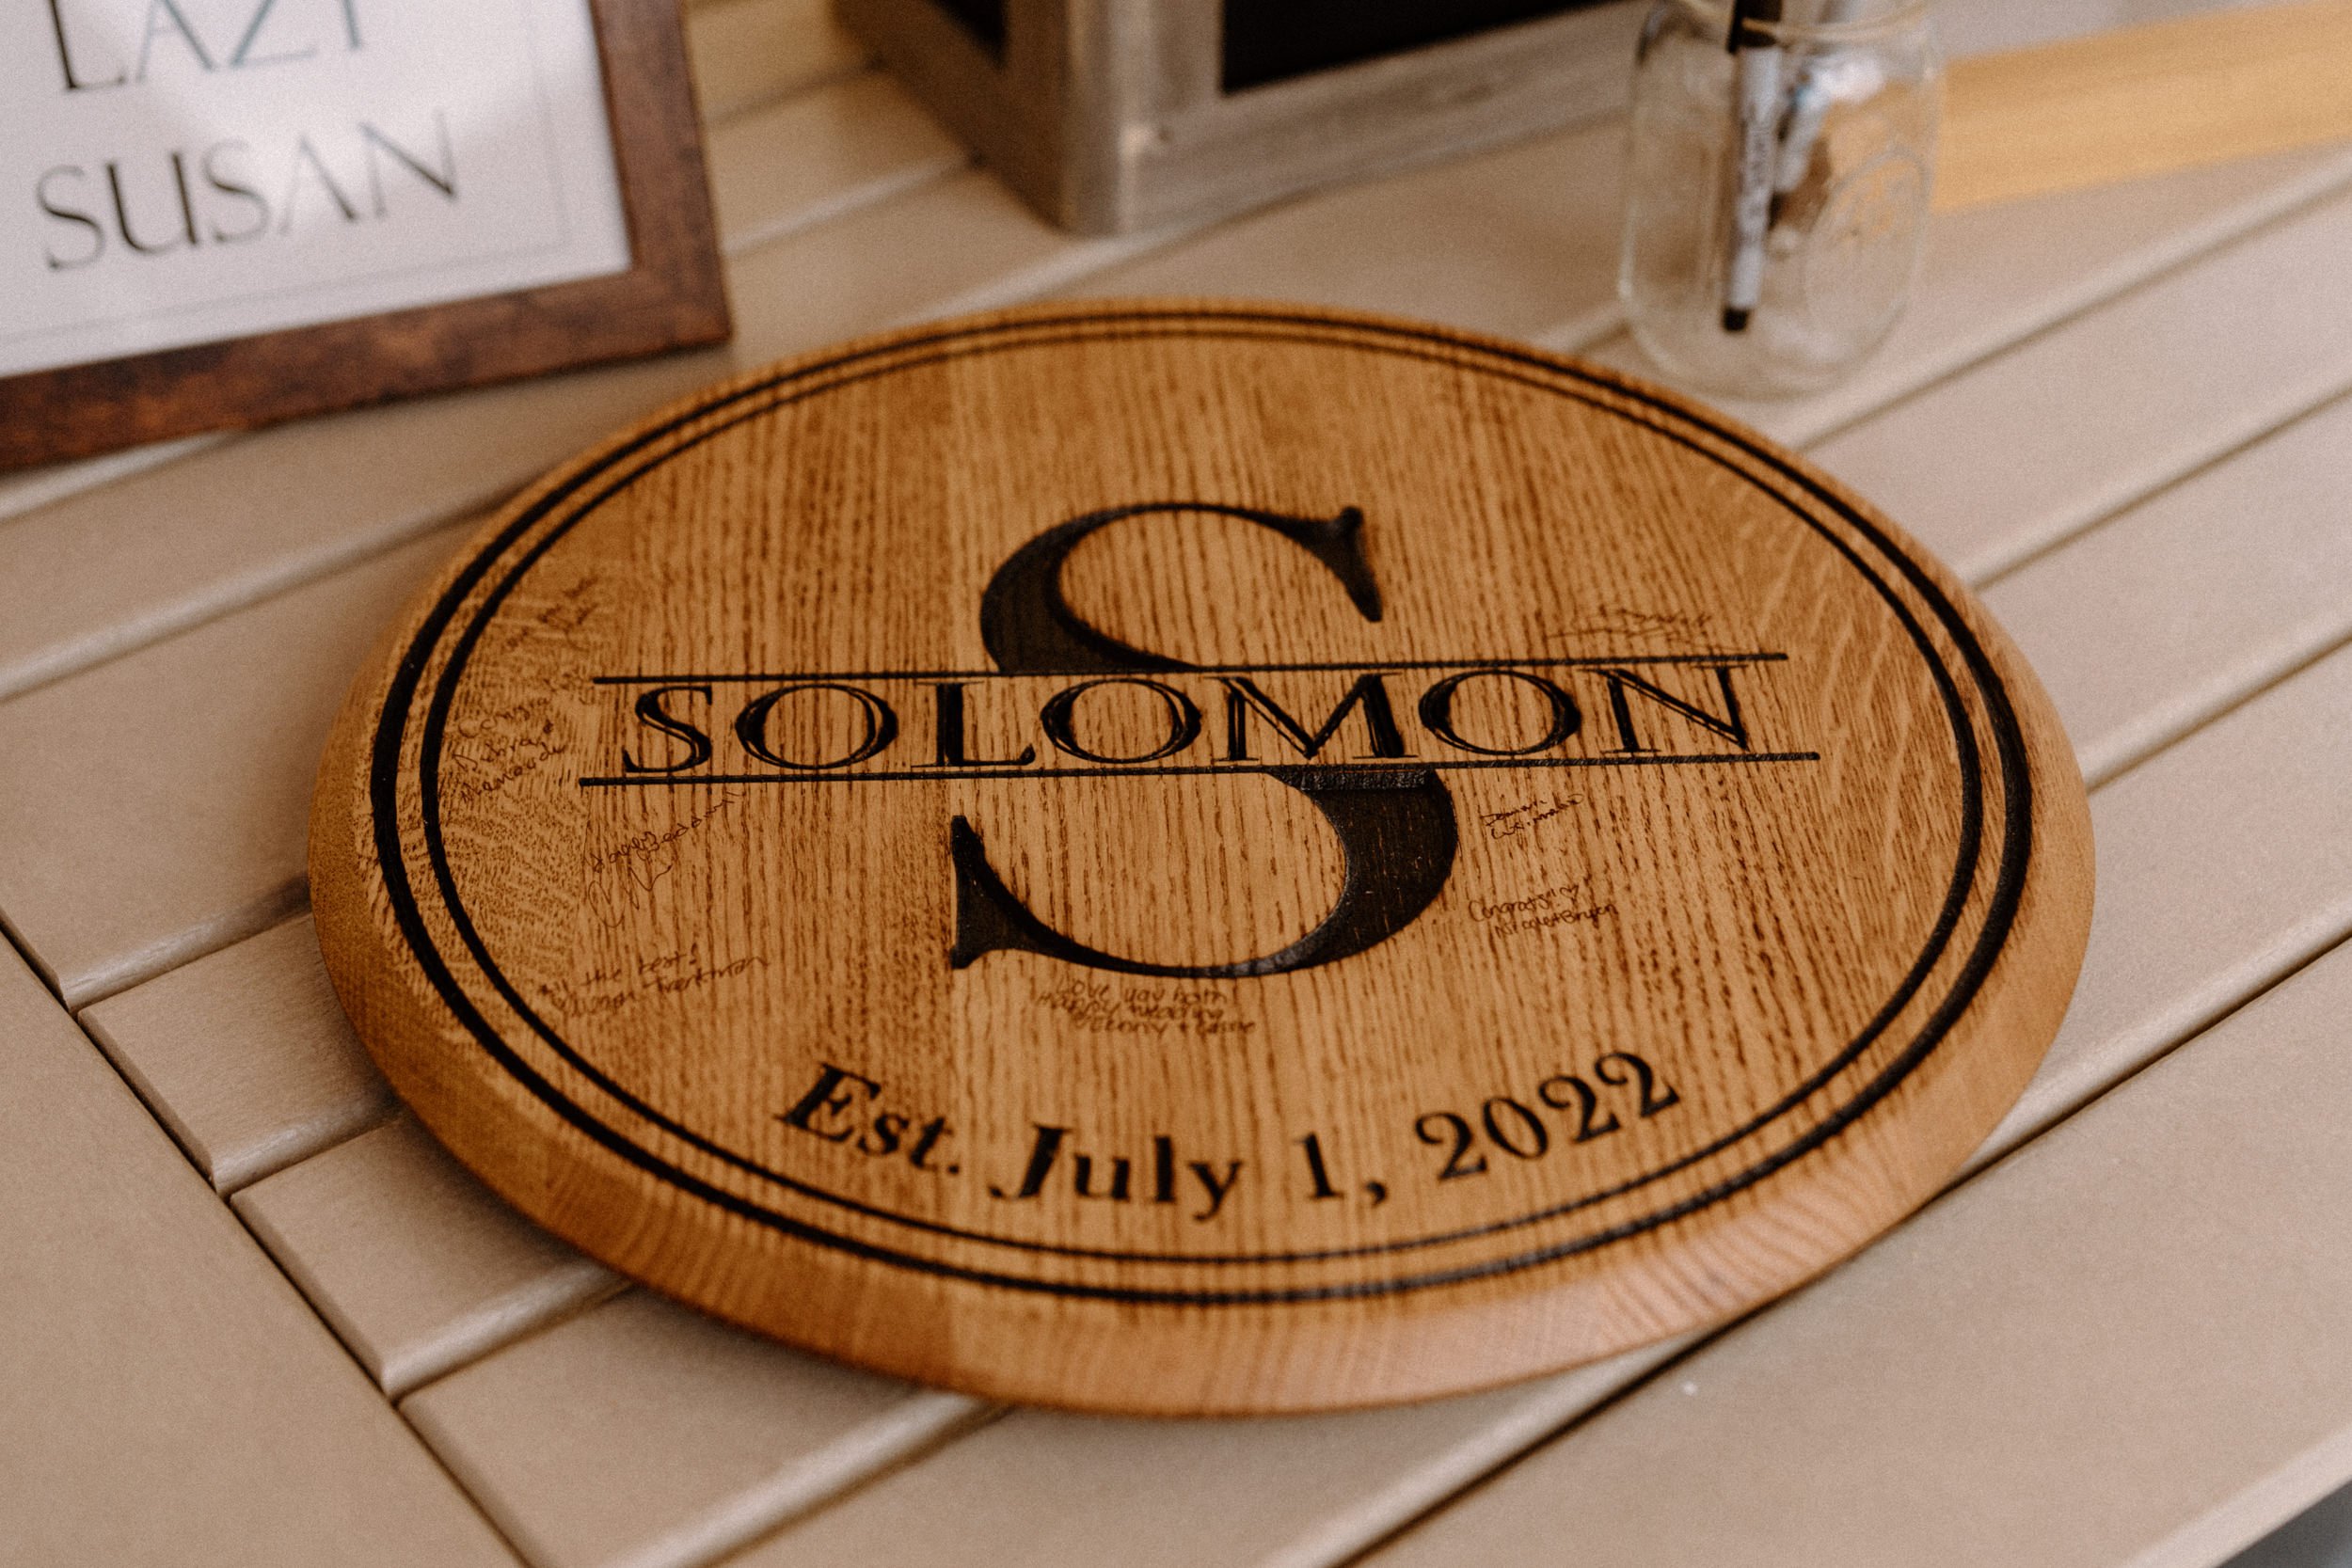 A round wooden sign with a large S and "Solomon" that guests write notes on